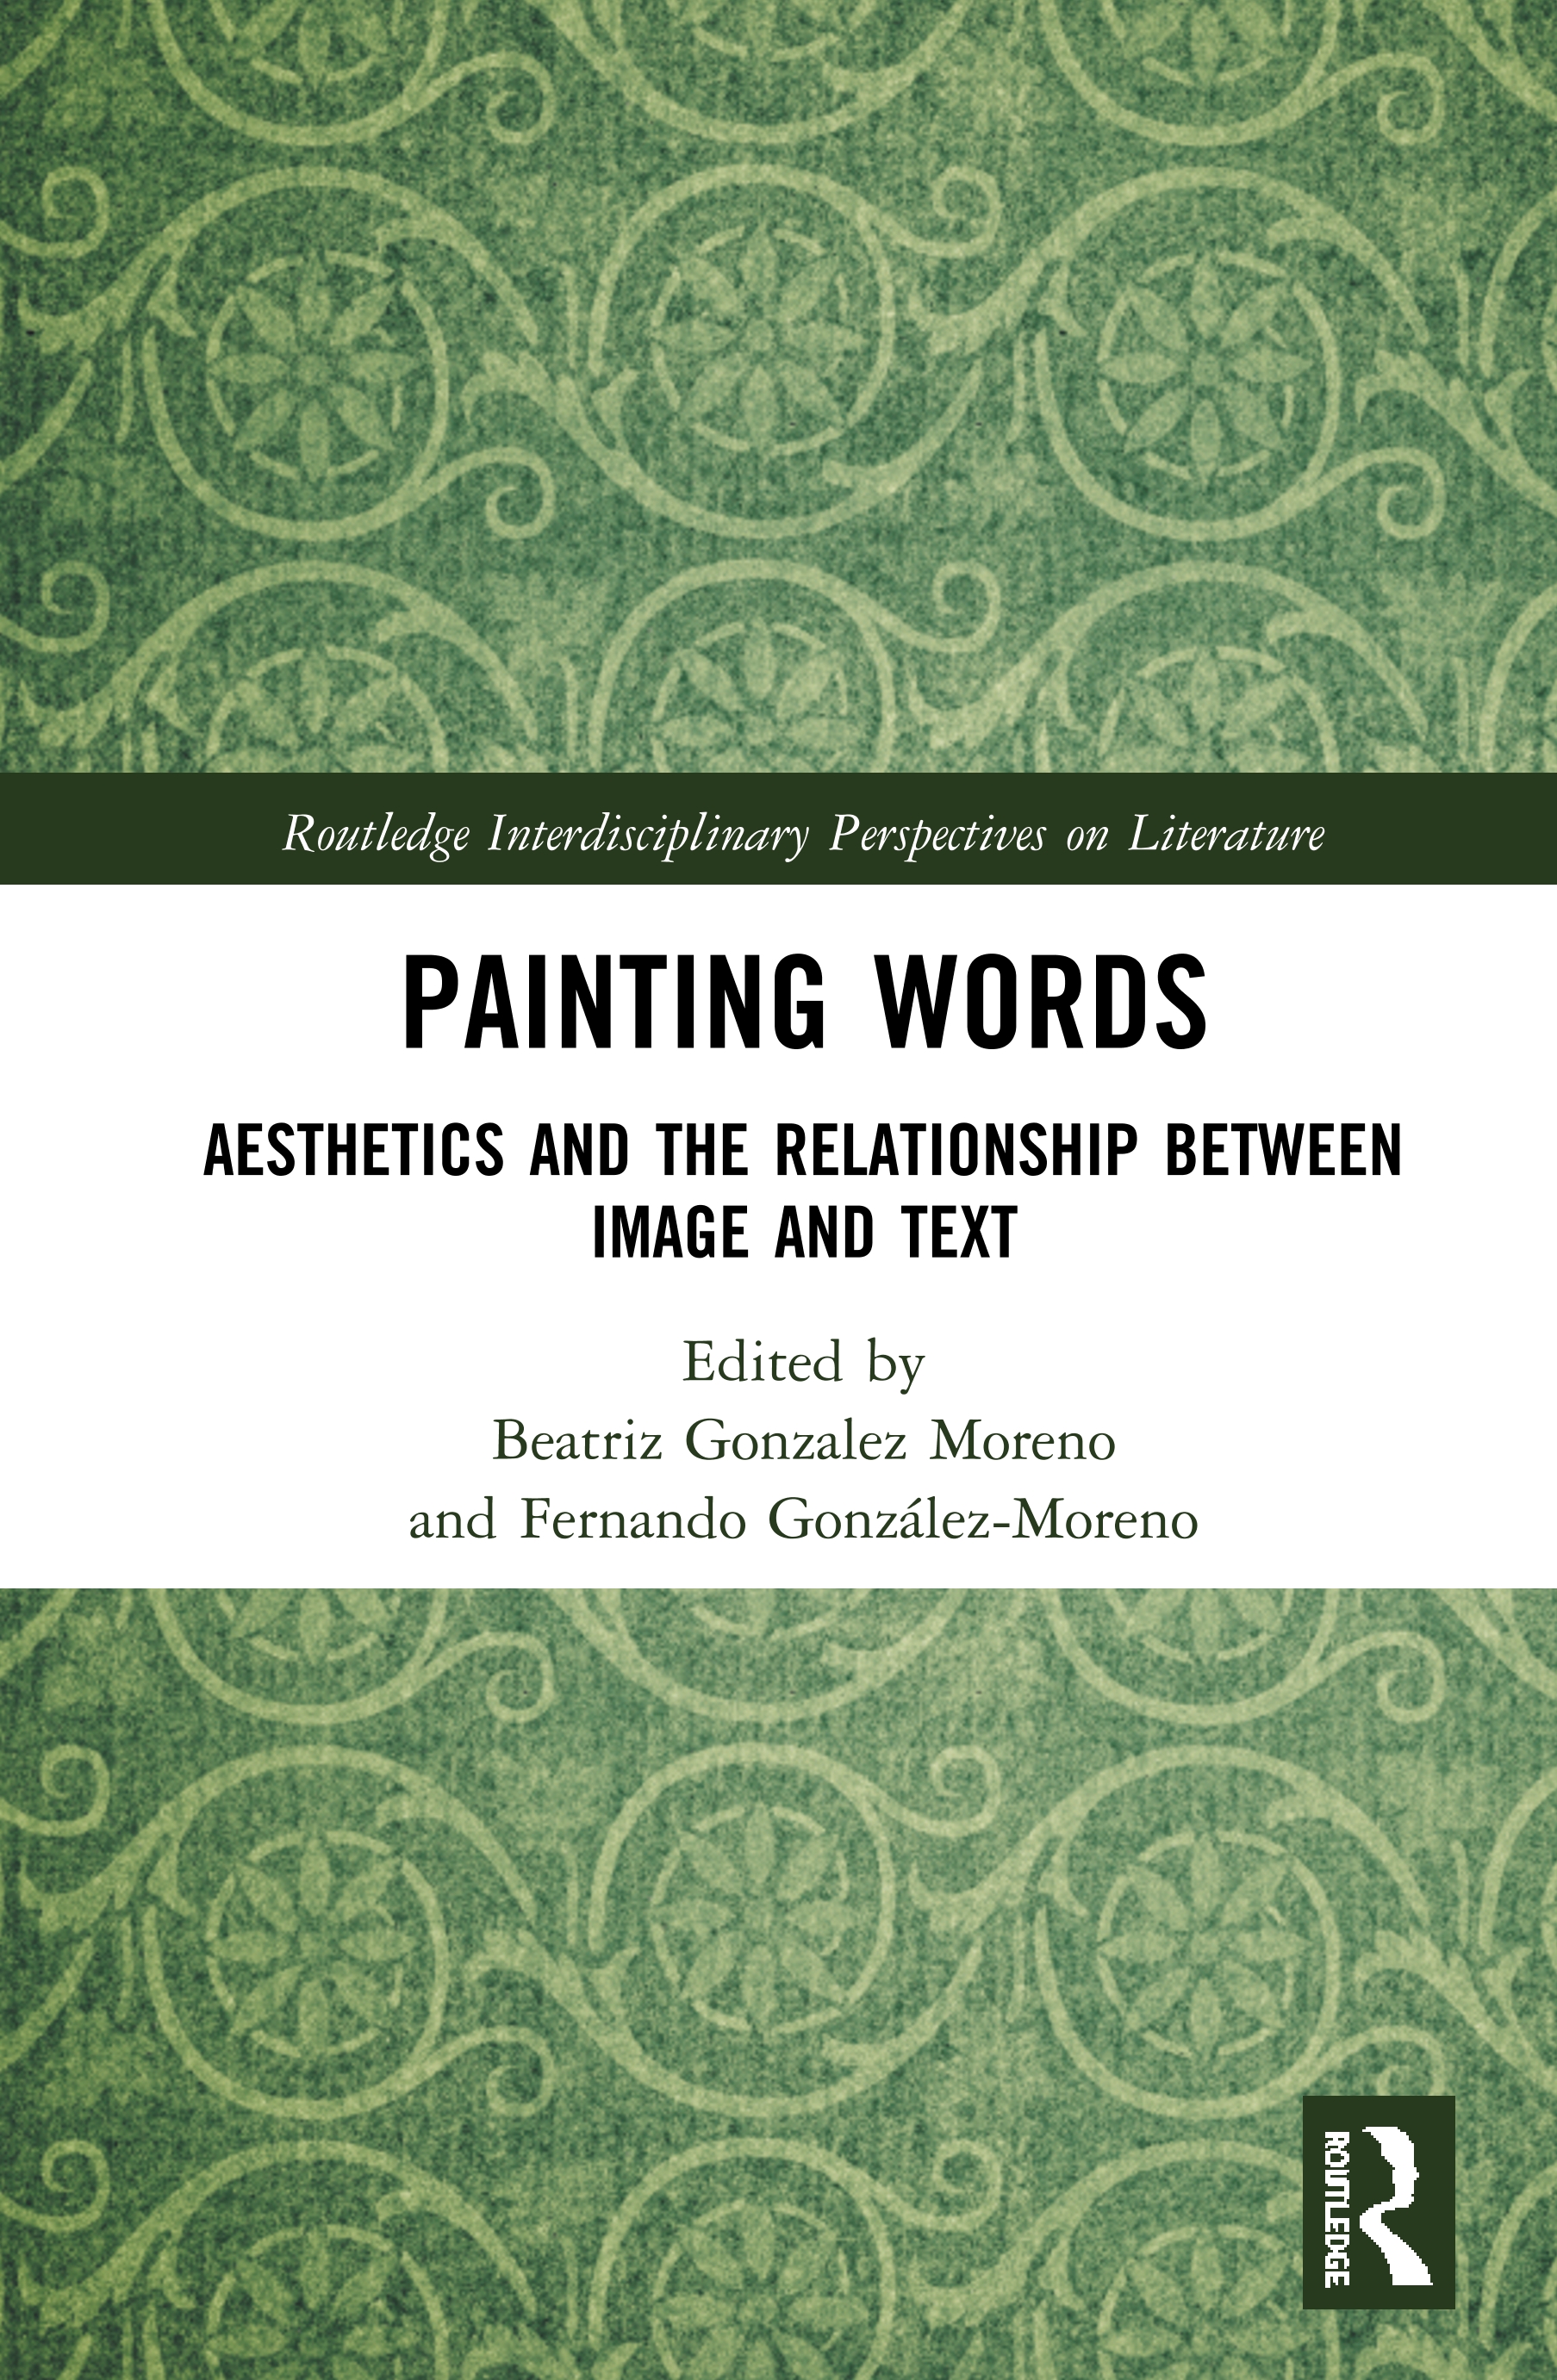 Presentación del libro Painting Words: Aesthetics and the Relationship Between Image and Text